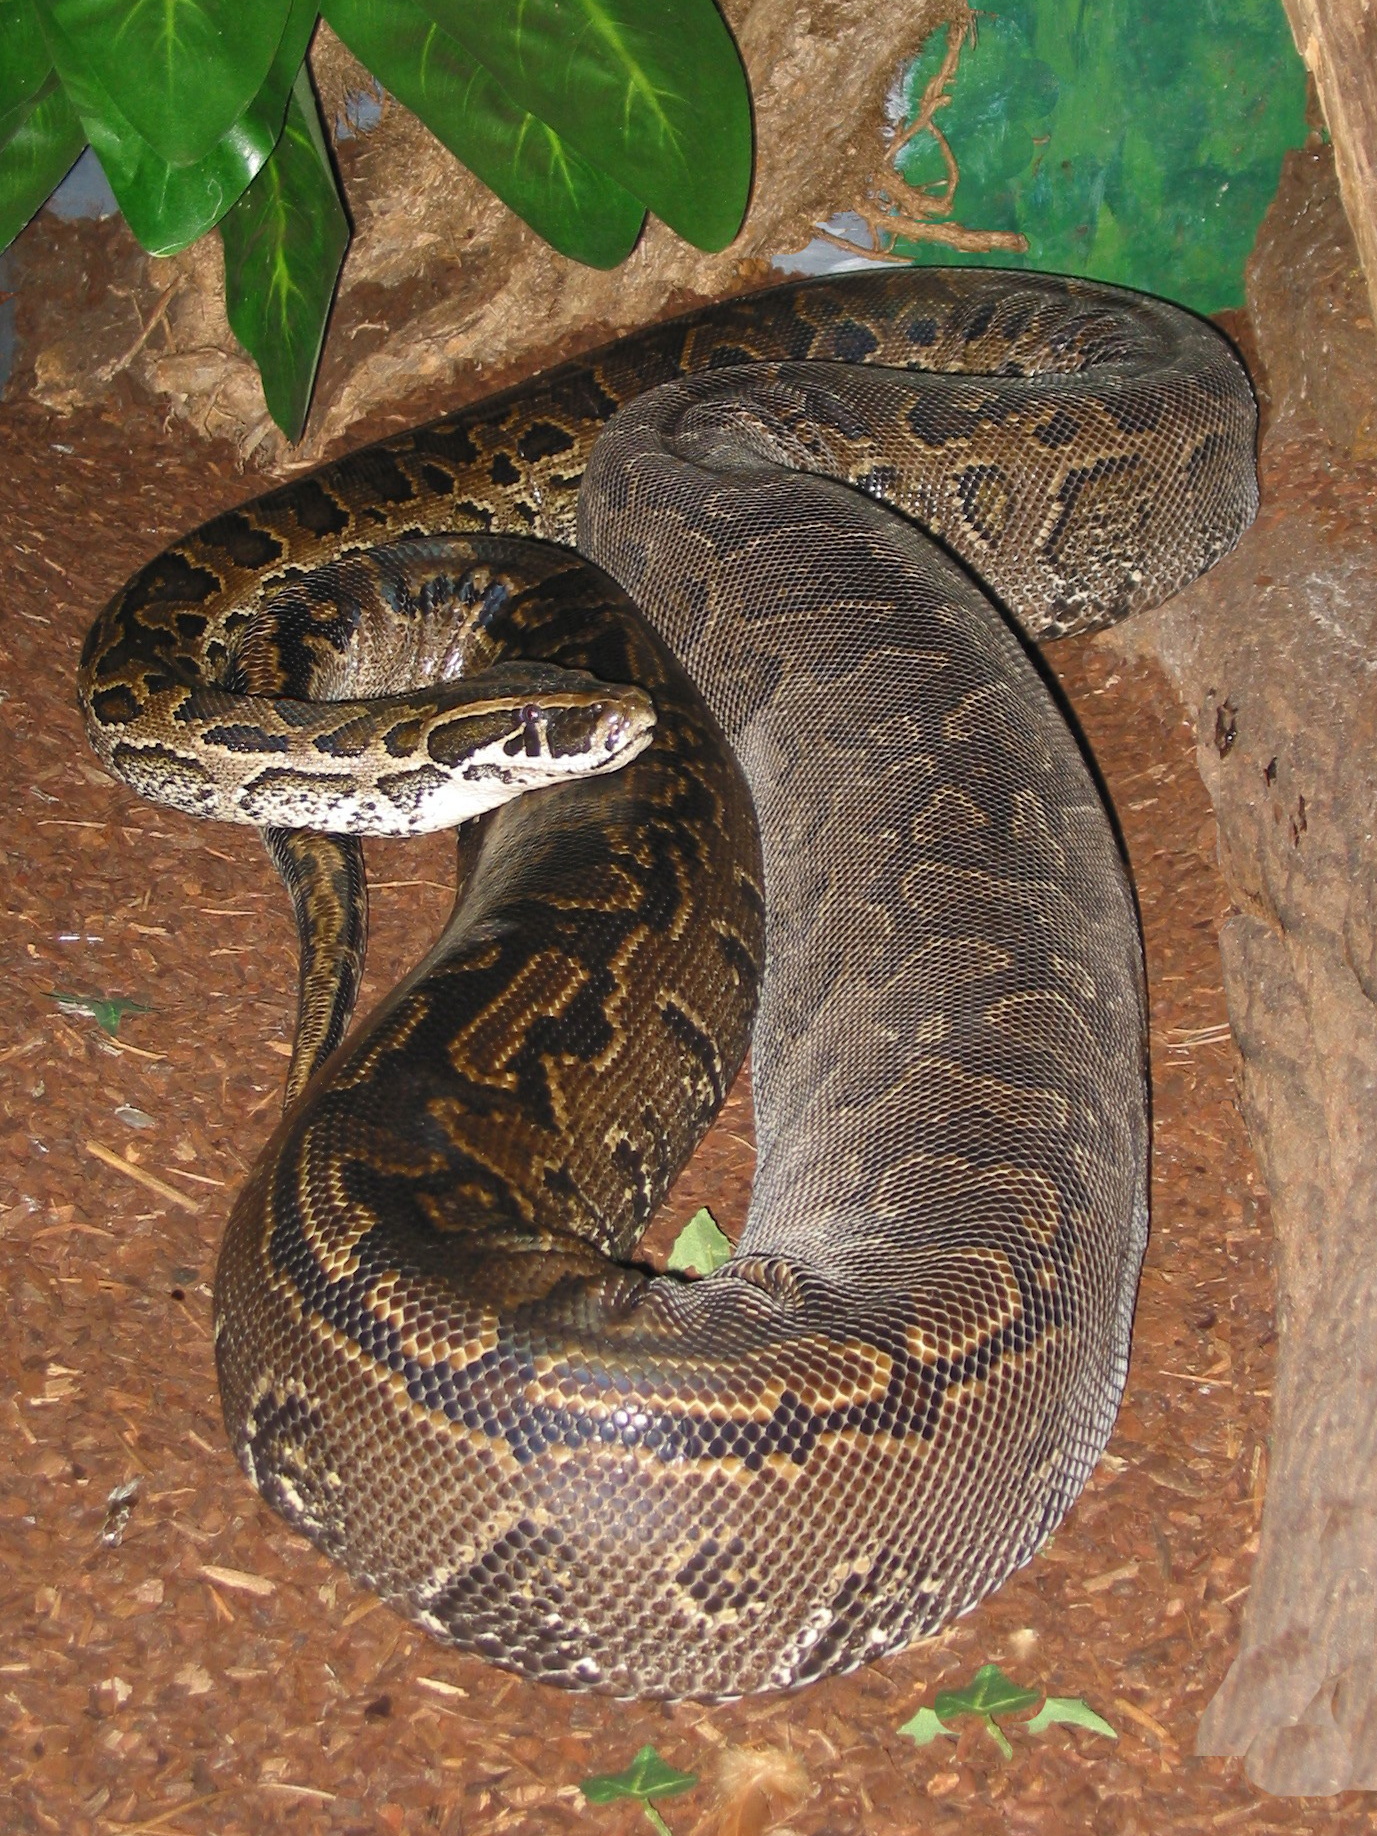 Are African rock pythons poisonous?